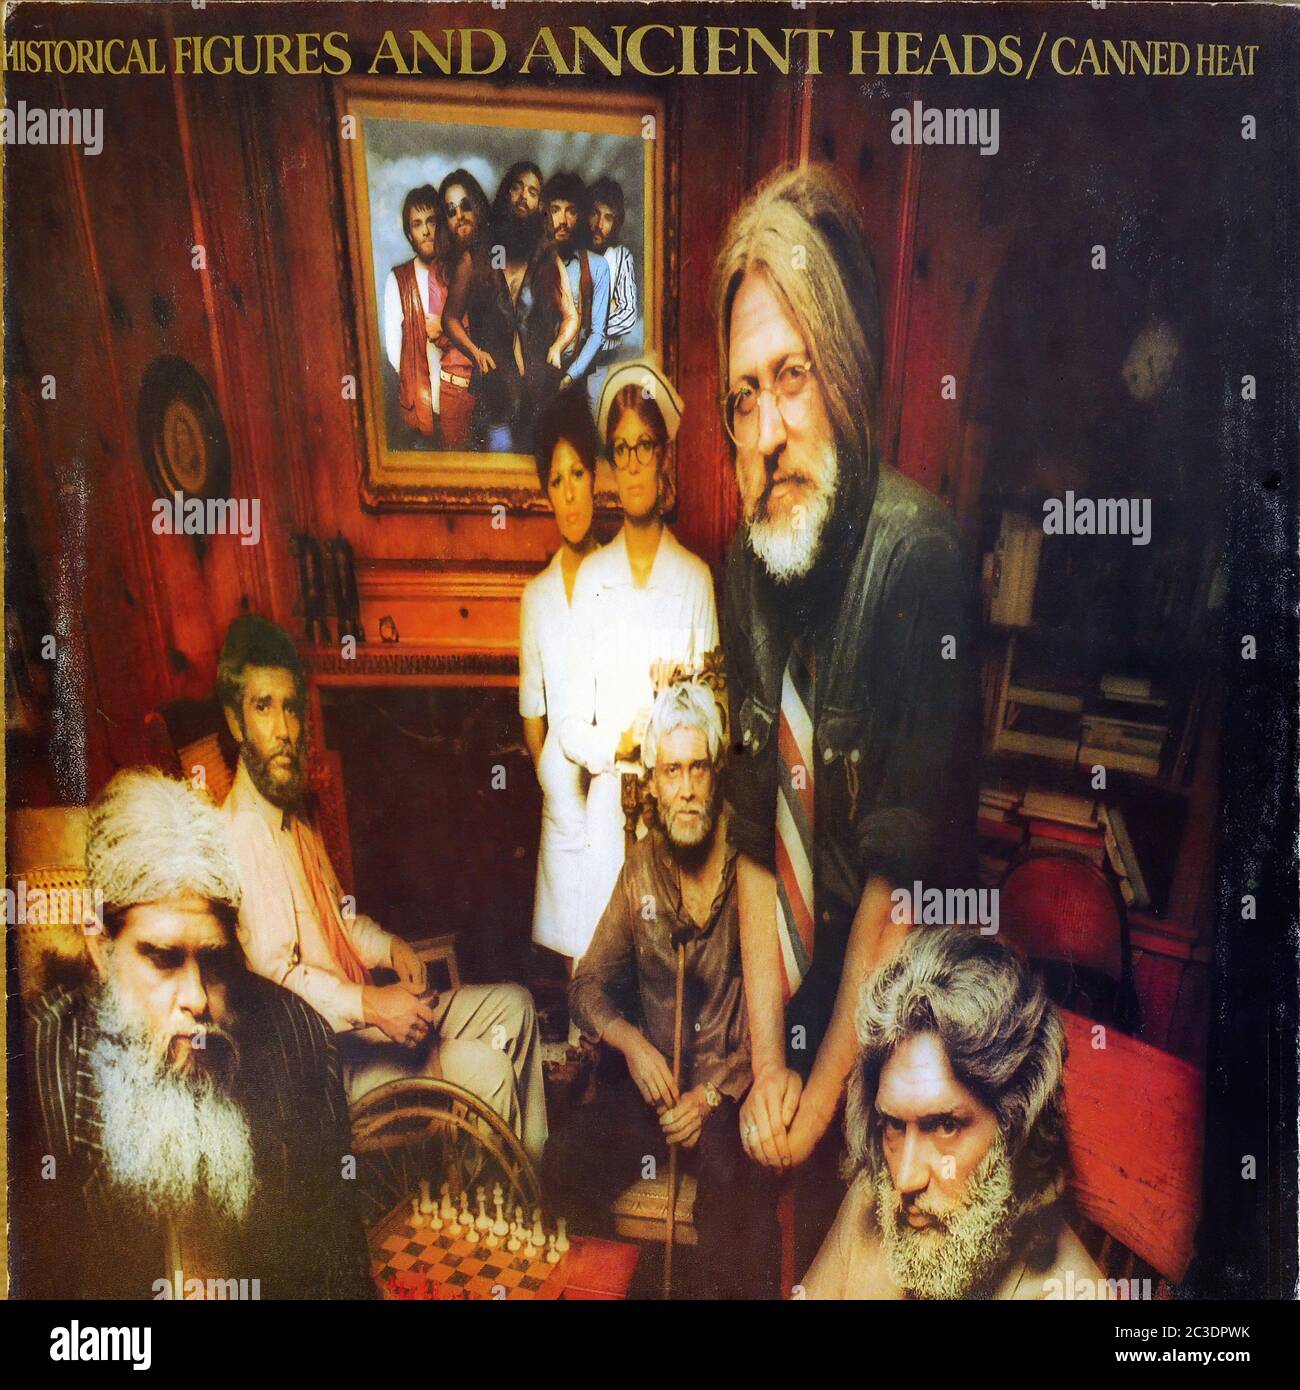 CANNED HEAT HISTORICAL FIGURES AND ANCIENT HEADS FOC  - Vintage 12'' LP vinyl Cover Stock Photo